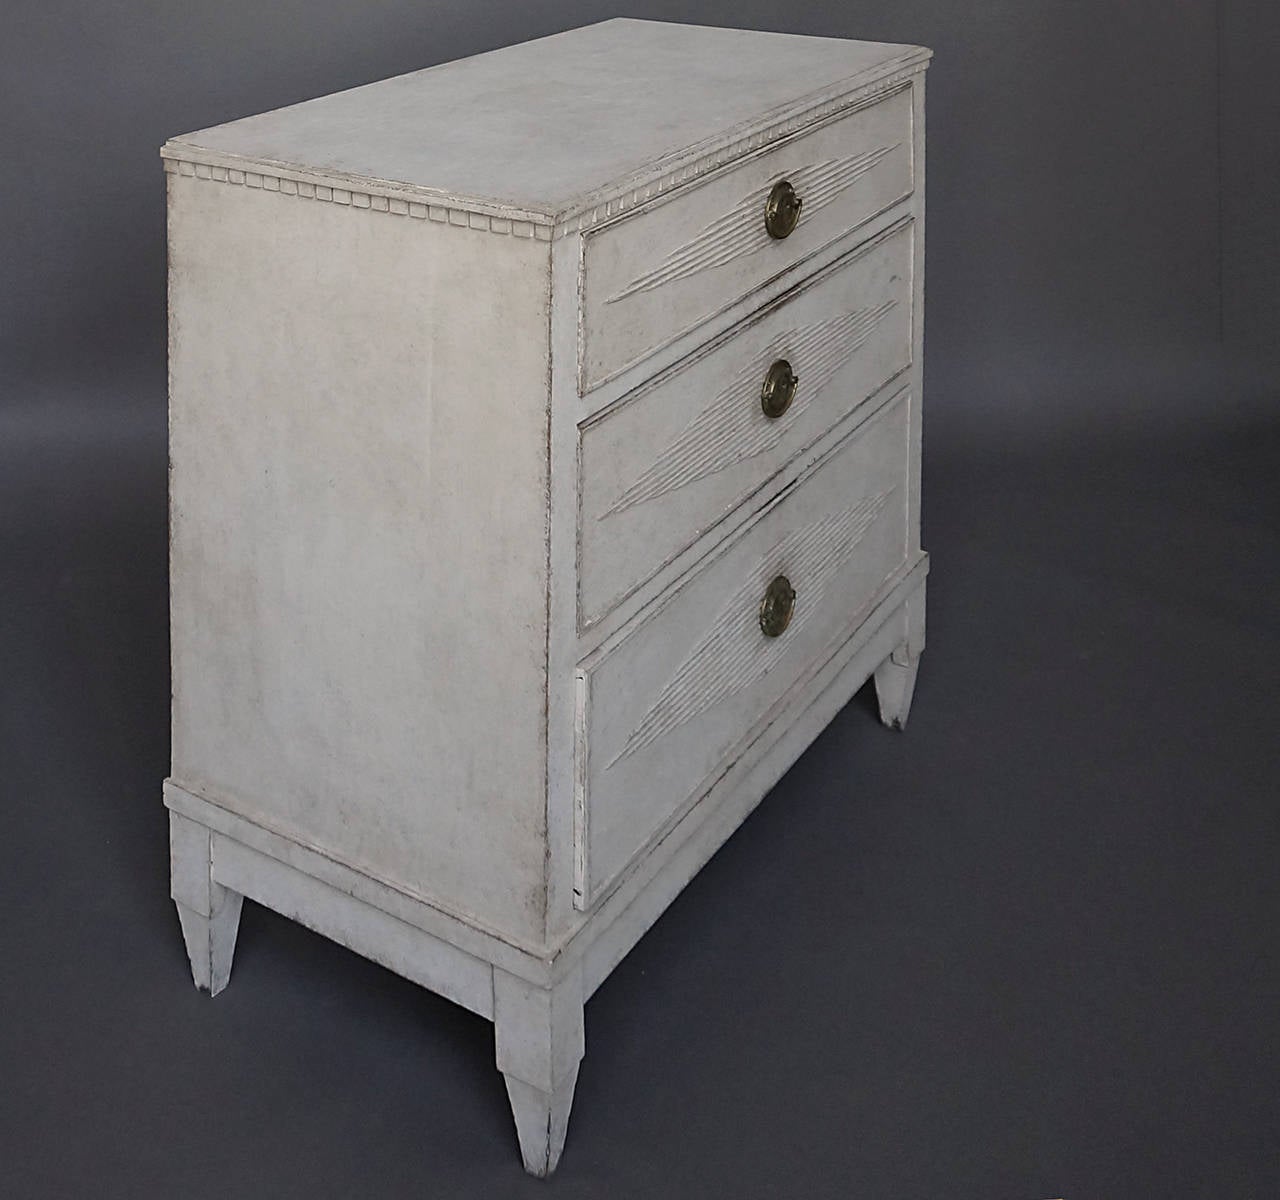 Period neoclassical commode, Sweden, circa 1840, with dentil molding under the top and a raise, reeded lozenge on each of the three drawers. Original brass hardware.